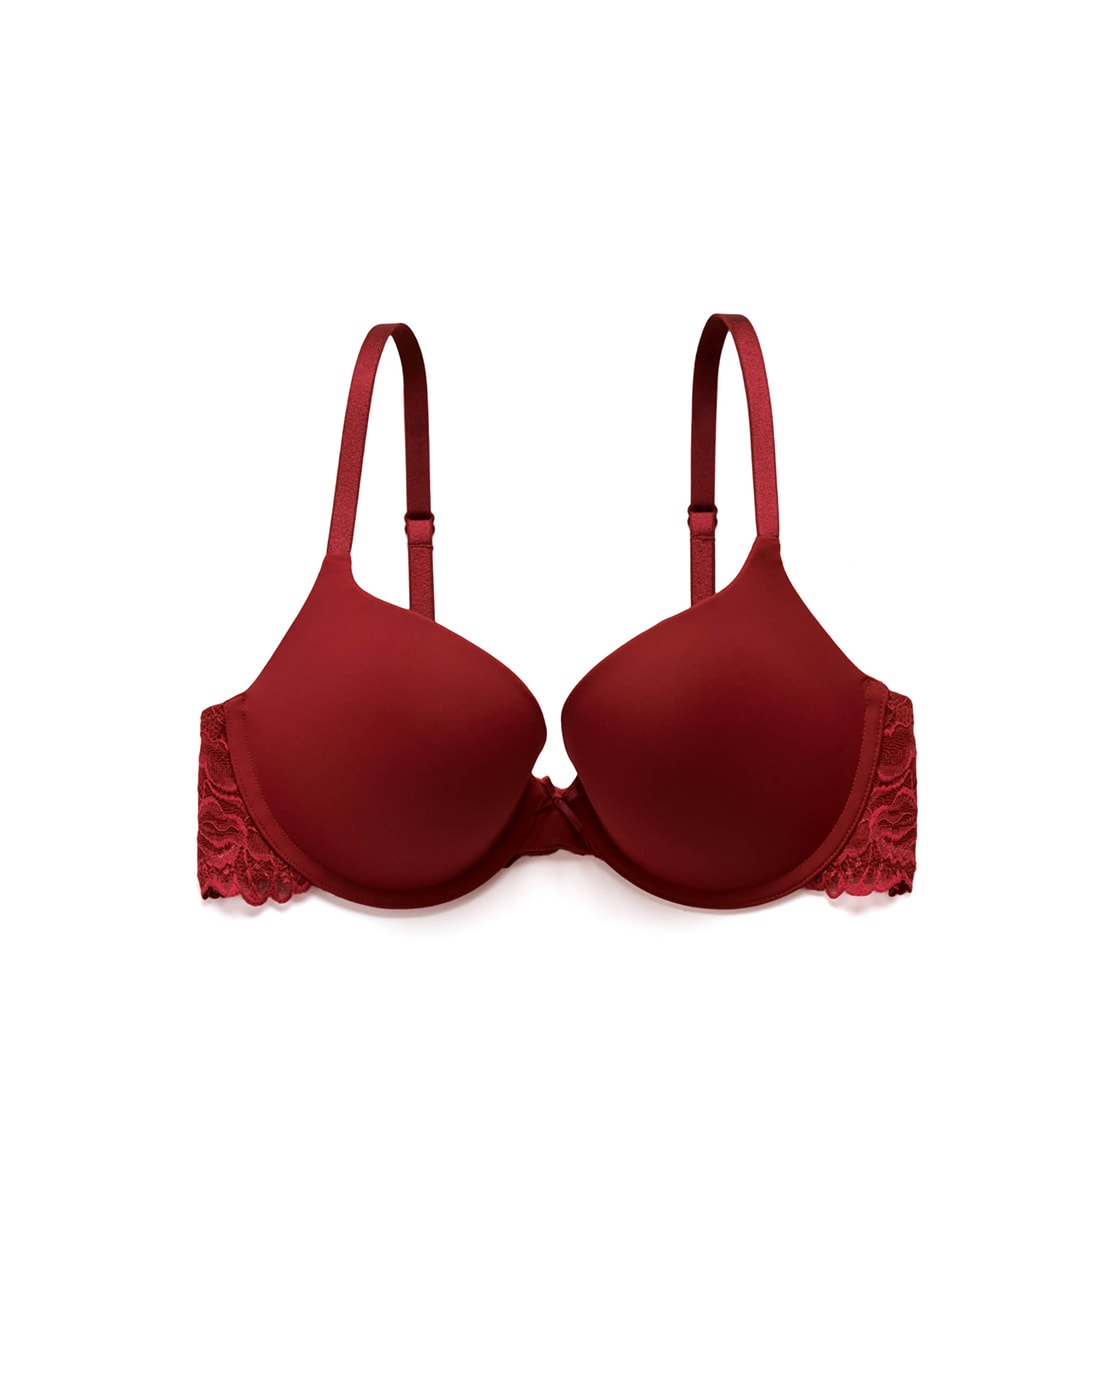 Buy online Red Net Push Up Bra from lingerie for Women by Body Lable for  ₹299 at 25% off